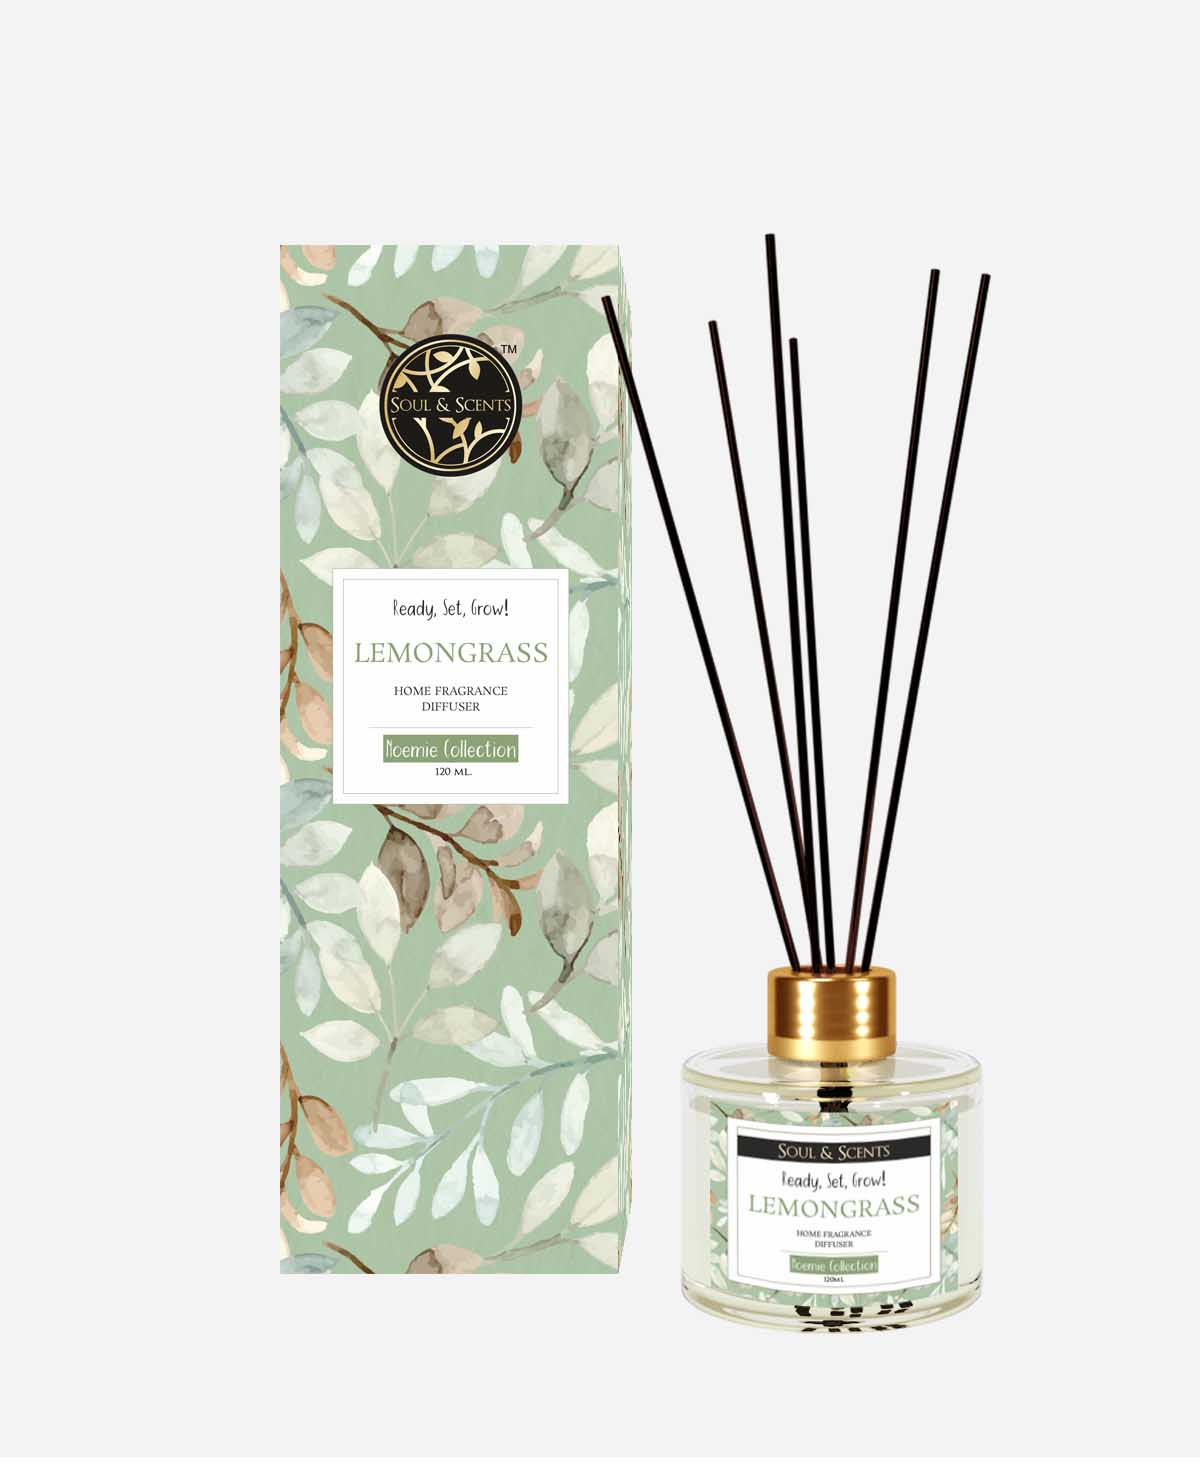 reed diffusers; room diffuser; perfume diffuser; room fragrance diffuser; scented diffuser; lemongrass reed diffuser